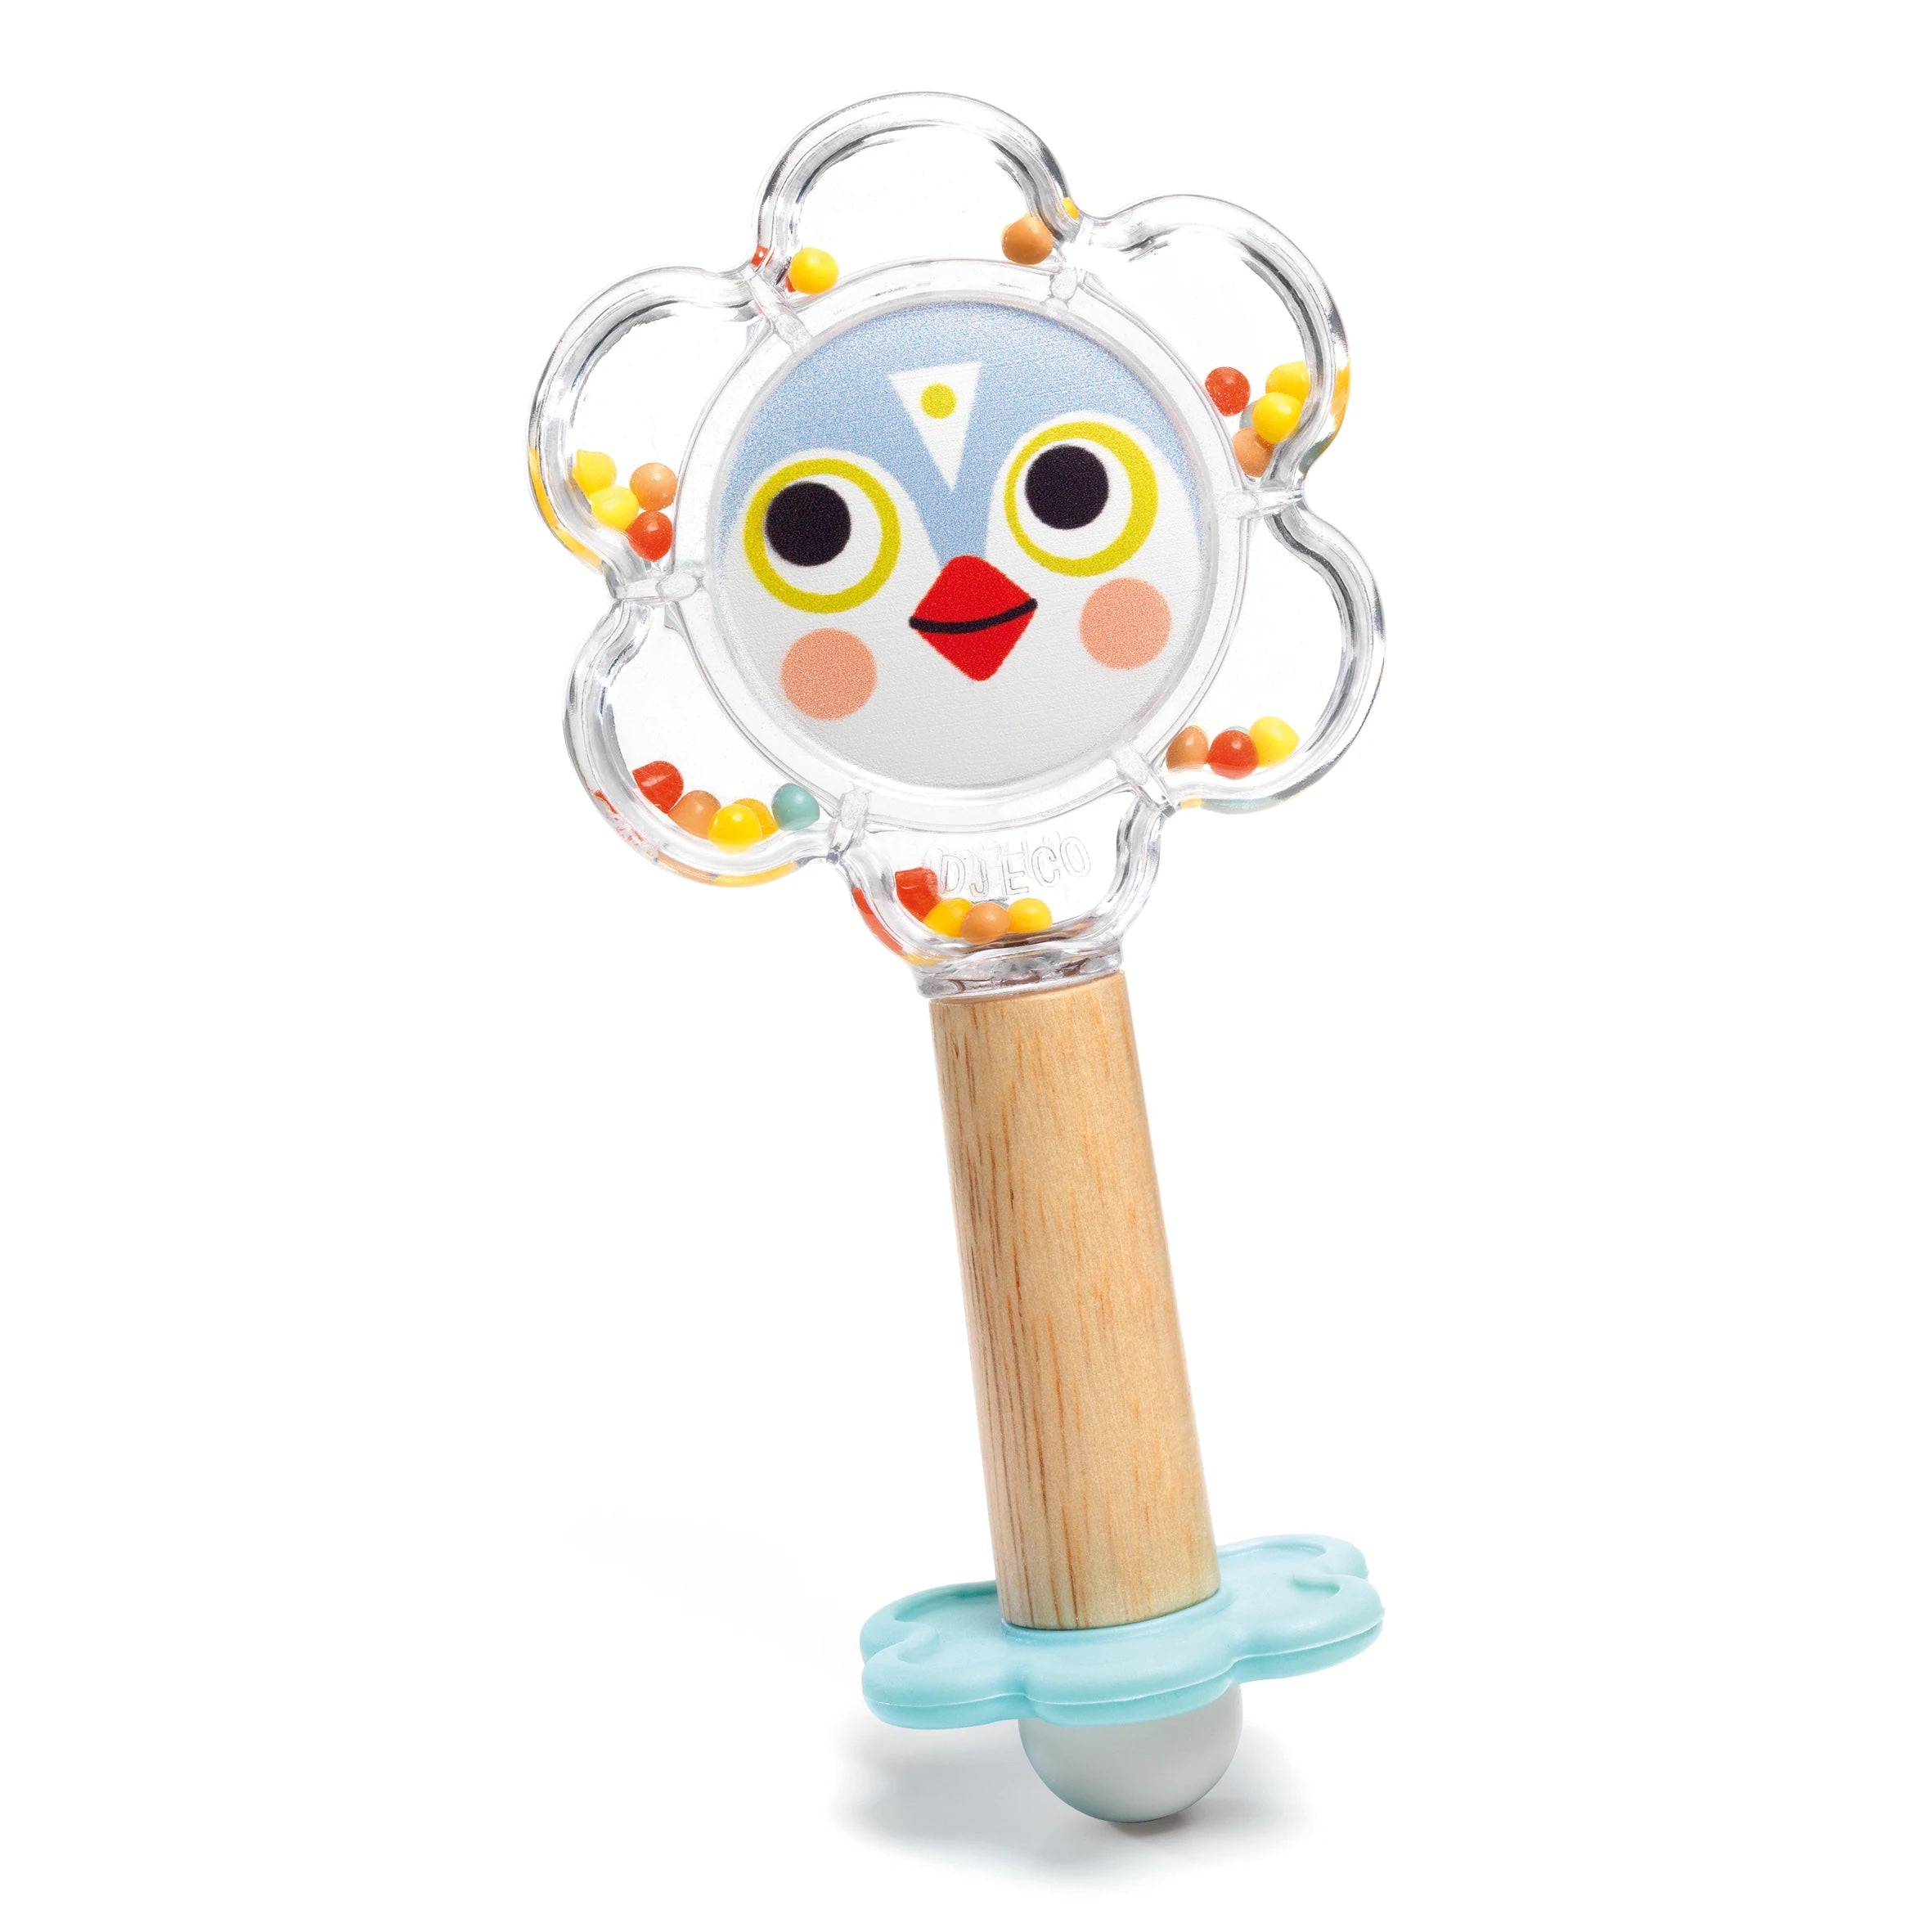 Baby White Baby Flower Rattle